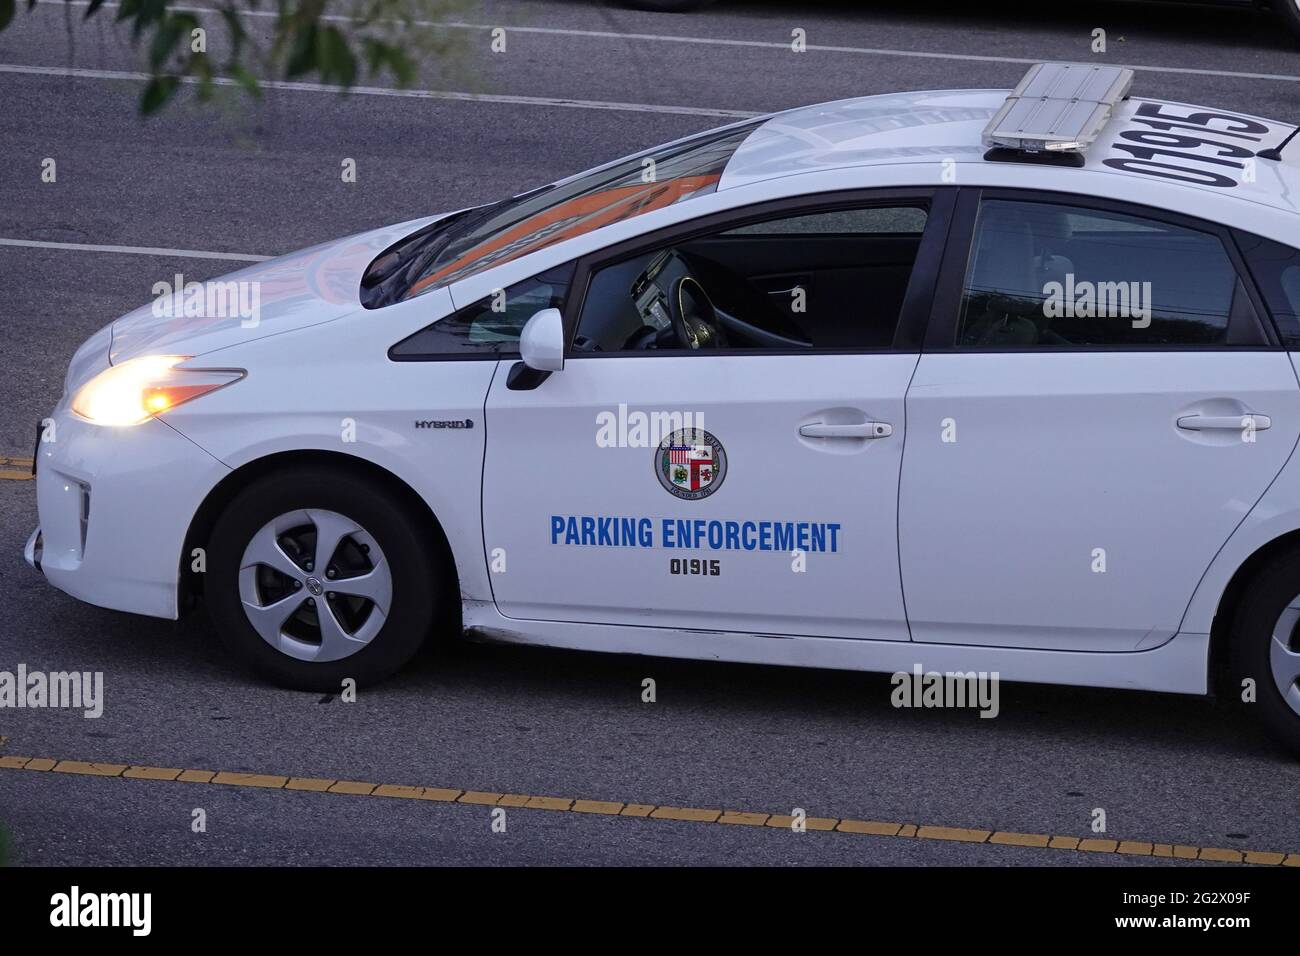 North Hollywood, CA / USA - May 23, 2021: A Los Angeles Parking Enforcement vehicle is shown parked on a city street. For editorial uses only. Stock Photo